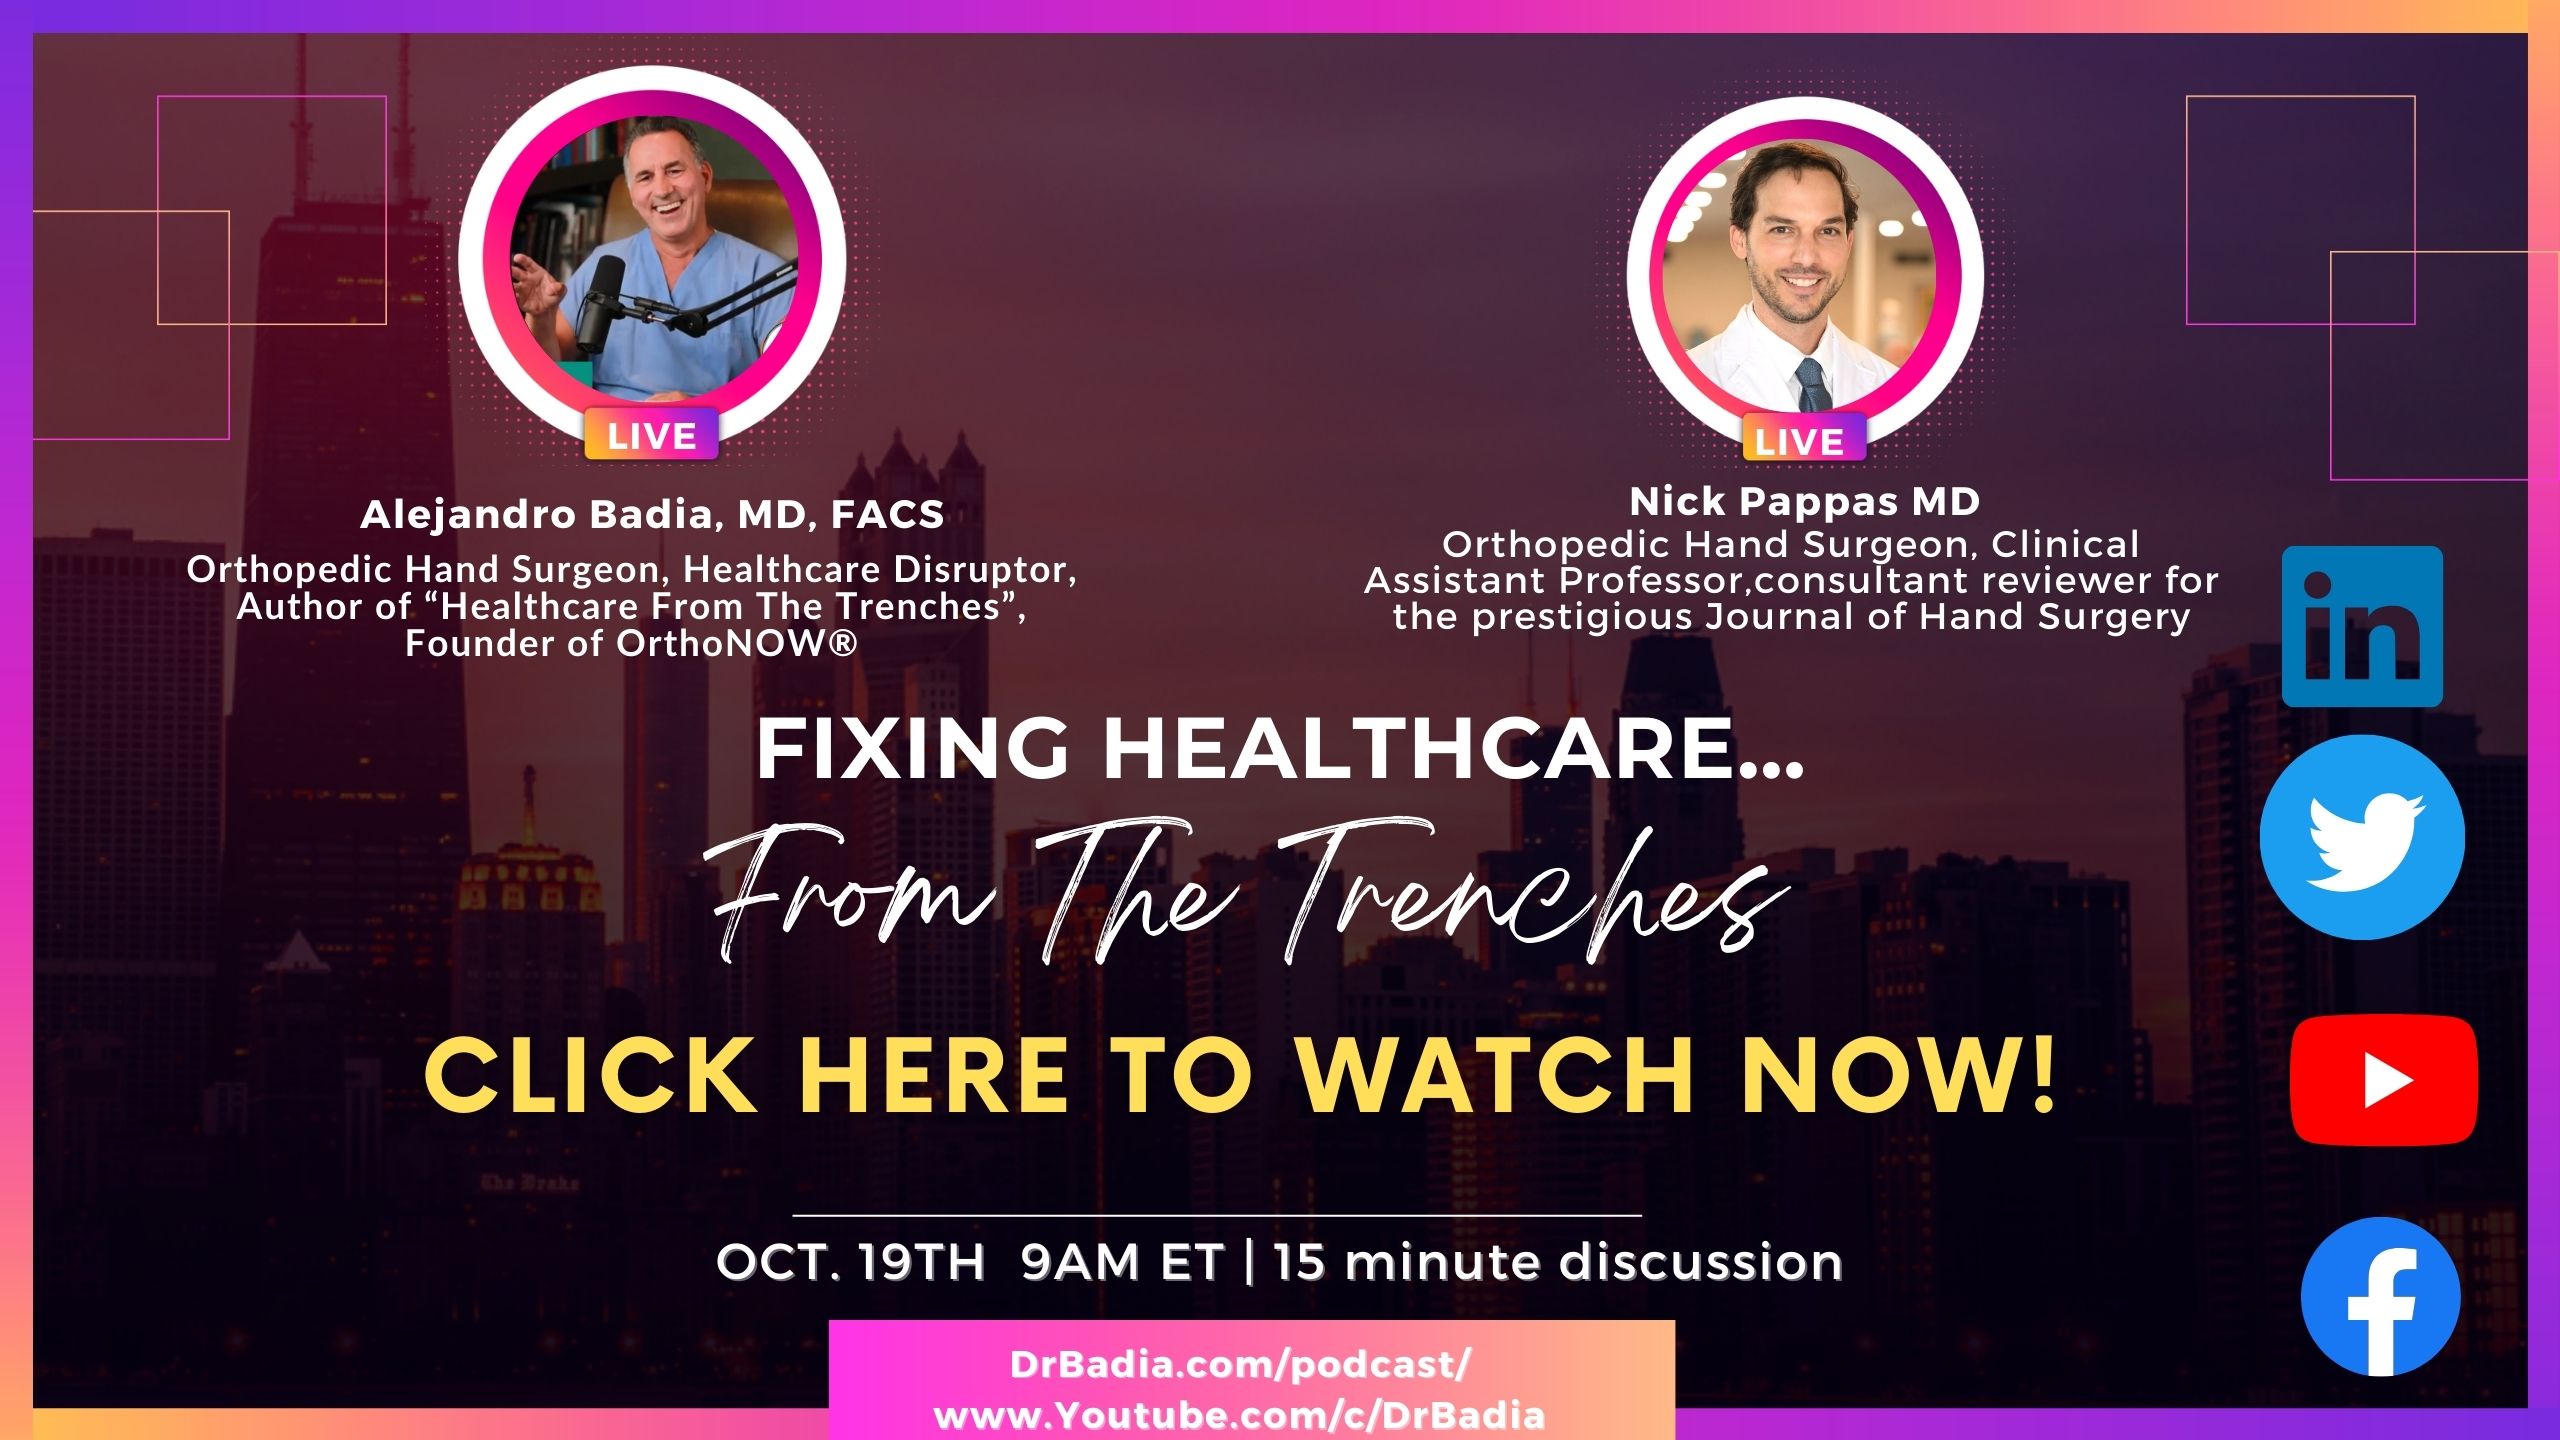 Episode 22 Fixing Healthcare...From the trenches E19